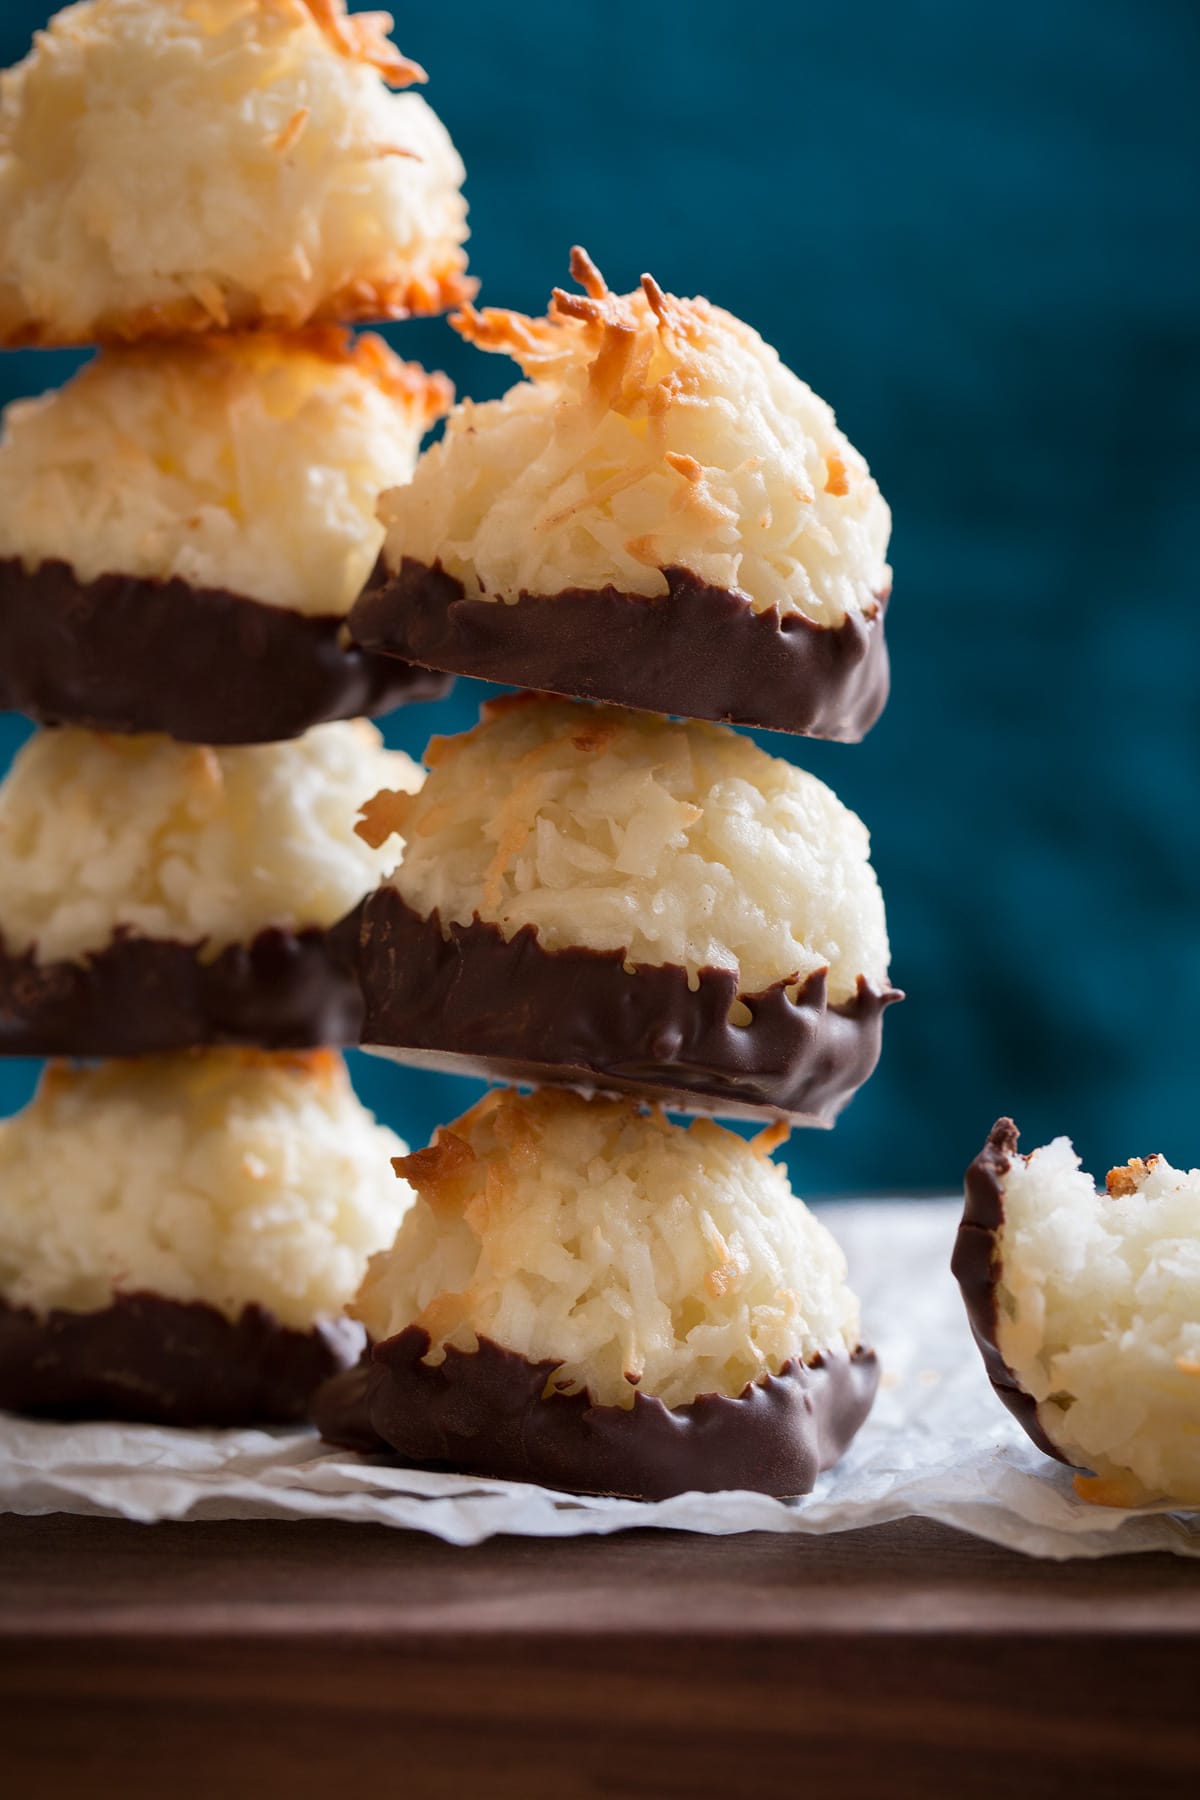 Two stacks of coconut macaroons dipped in chocolate.